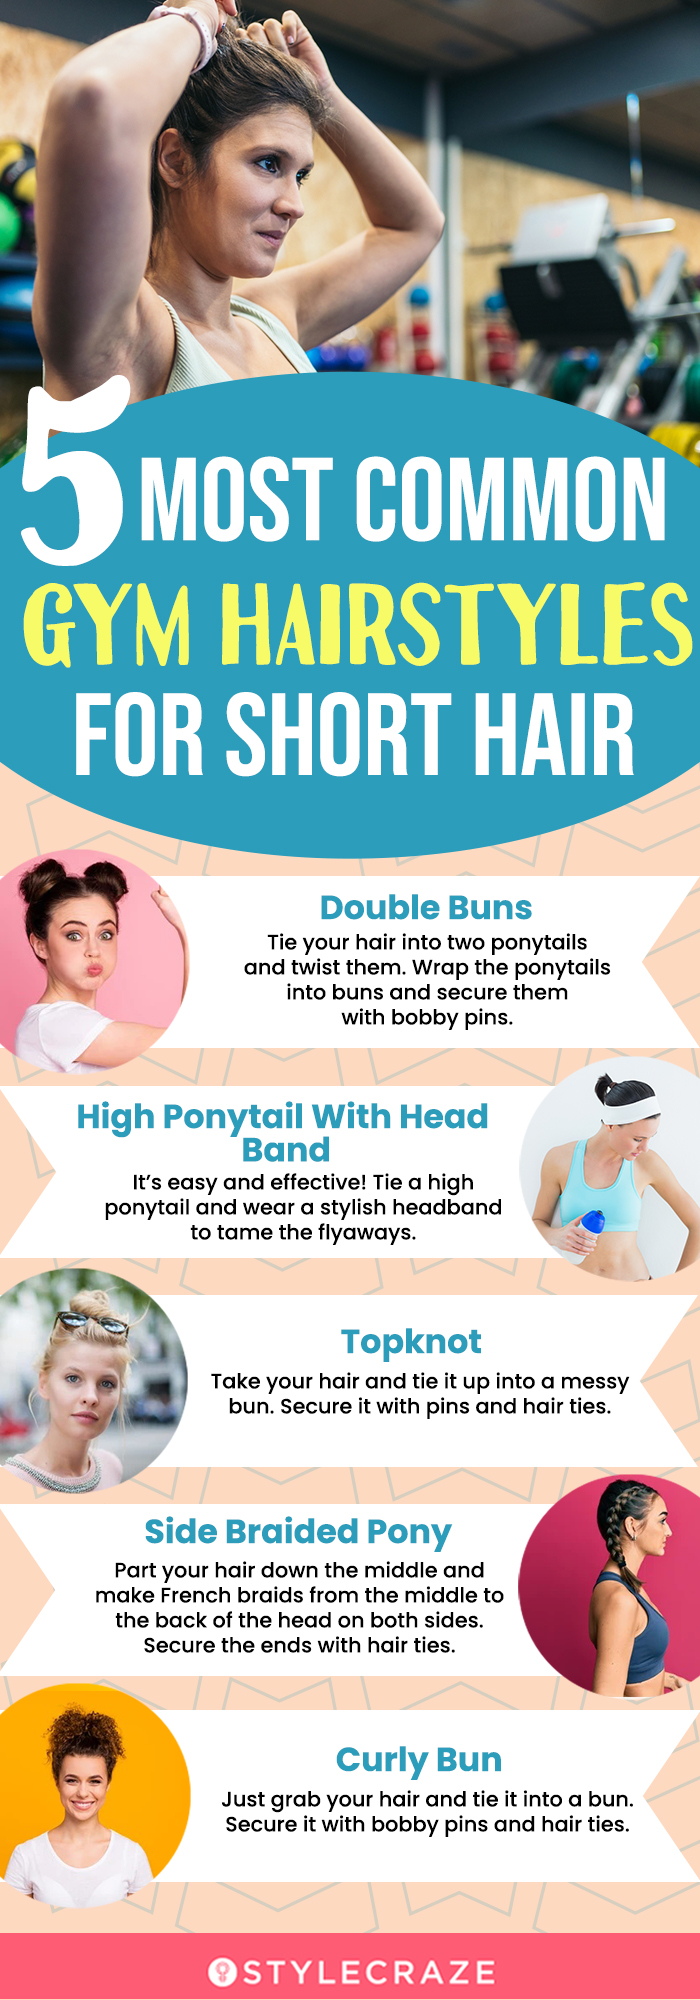 5 most common gym hairstyles for short hair (infographic)